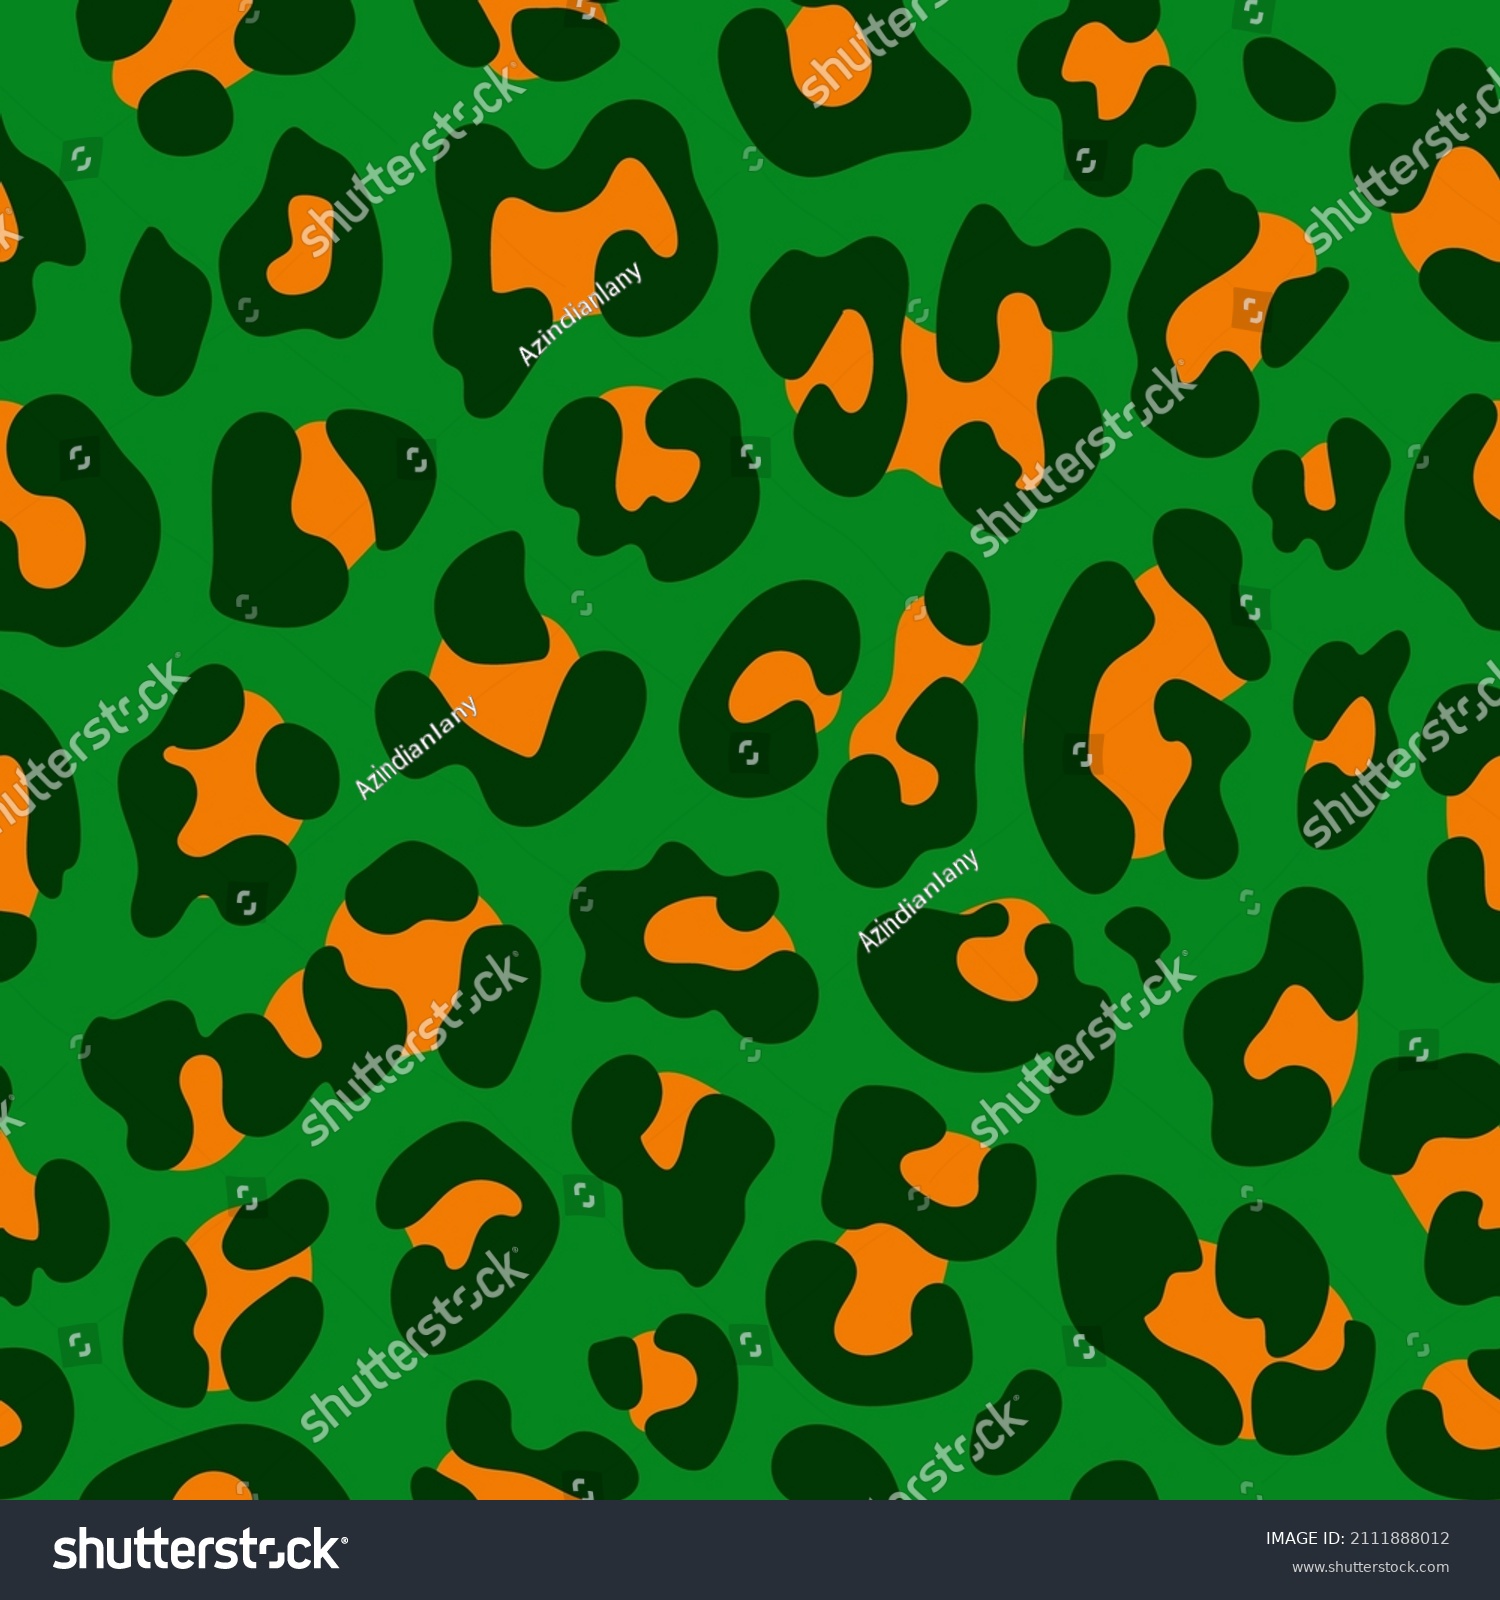 SVG of Saint Patrick's Day pattern with green leopard print. Irish leprechaun shenanigans lucky charm. Kiss me, I am Irish. Colorful print for poster, card, textiles, wallpaper, backgrounds. svg